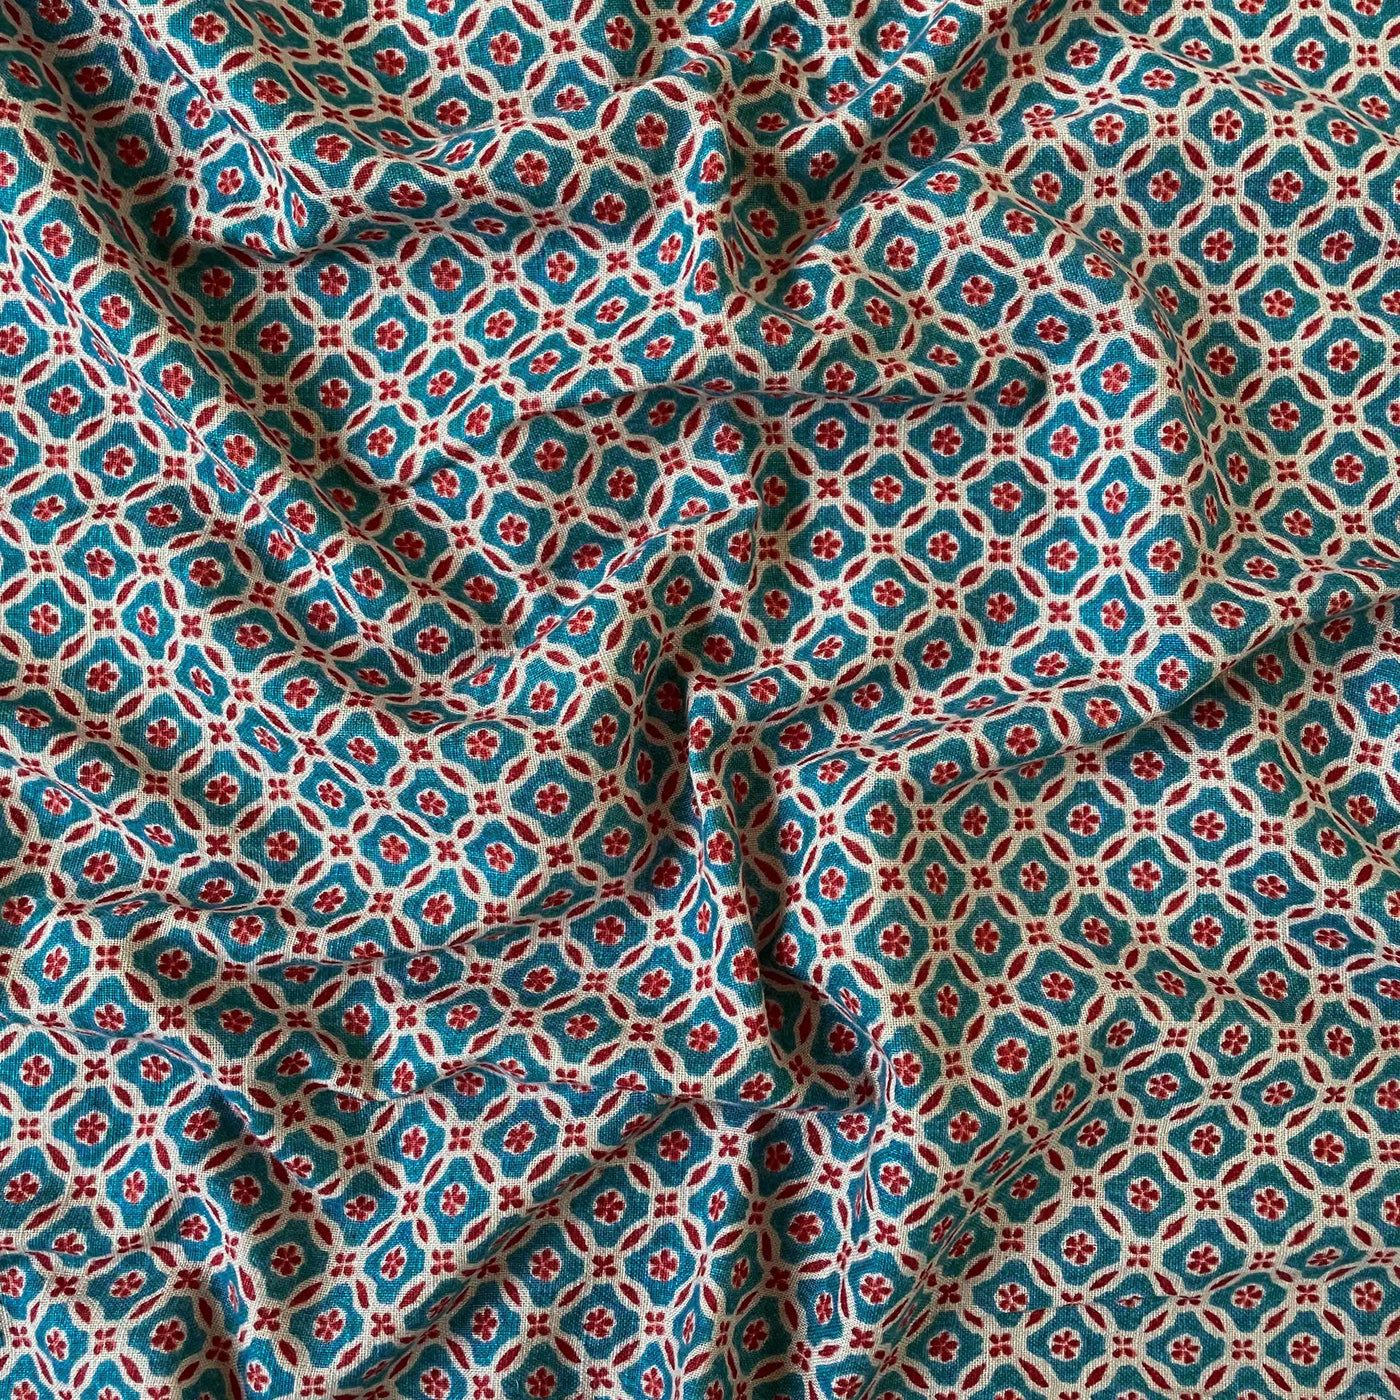 Fabric Pandit Fabric Dusty Blue & Maroon Vintage Floral Jaal Hand Block Printed Pure Cotton Silk Fabric (Width 42 Inches)